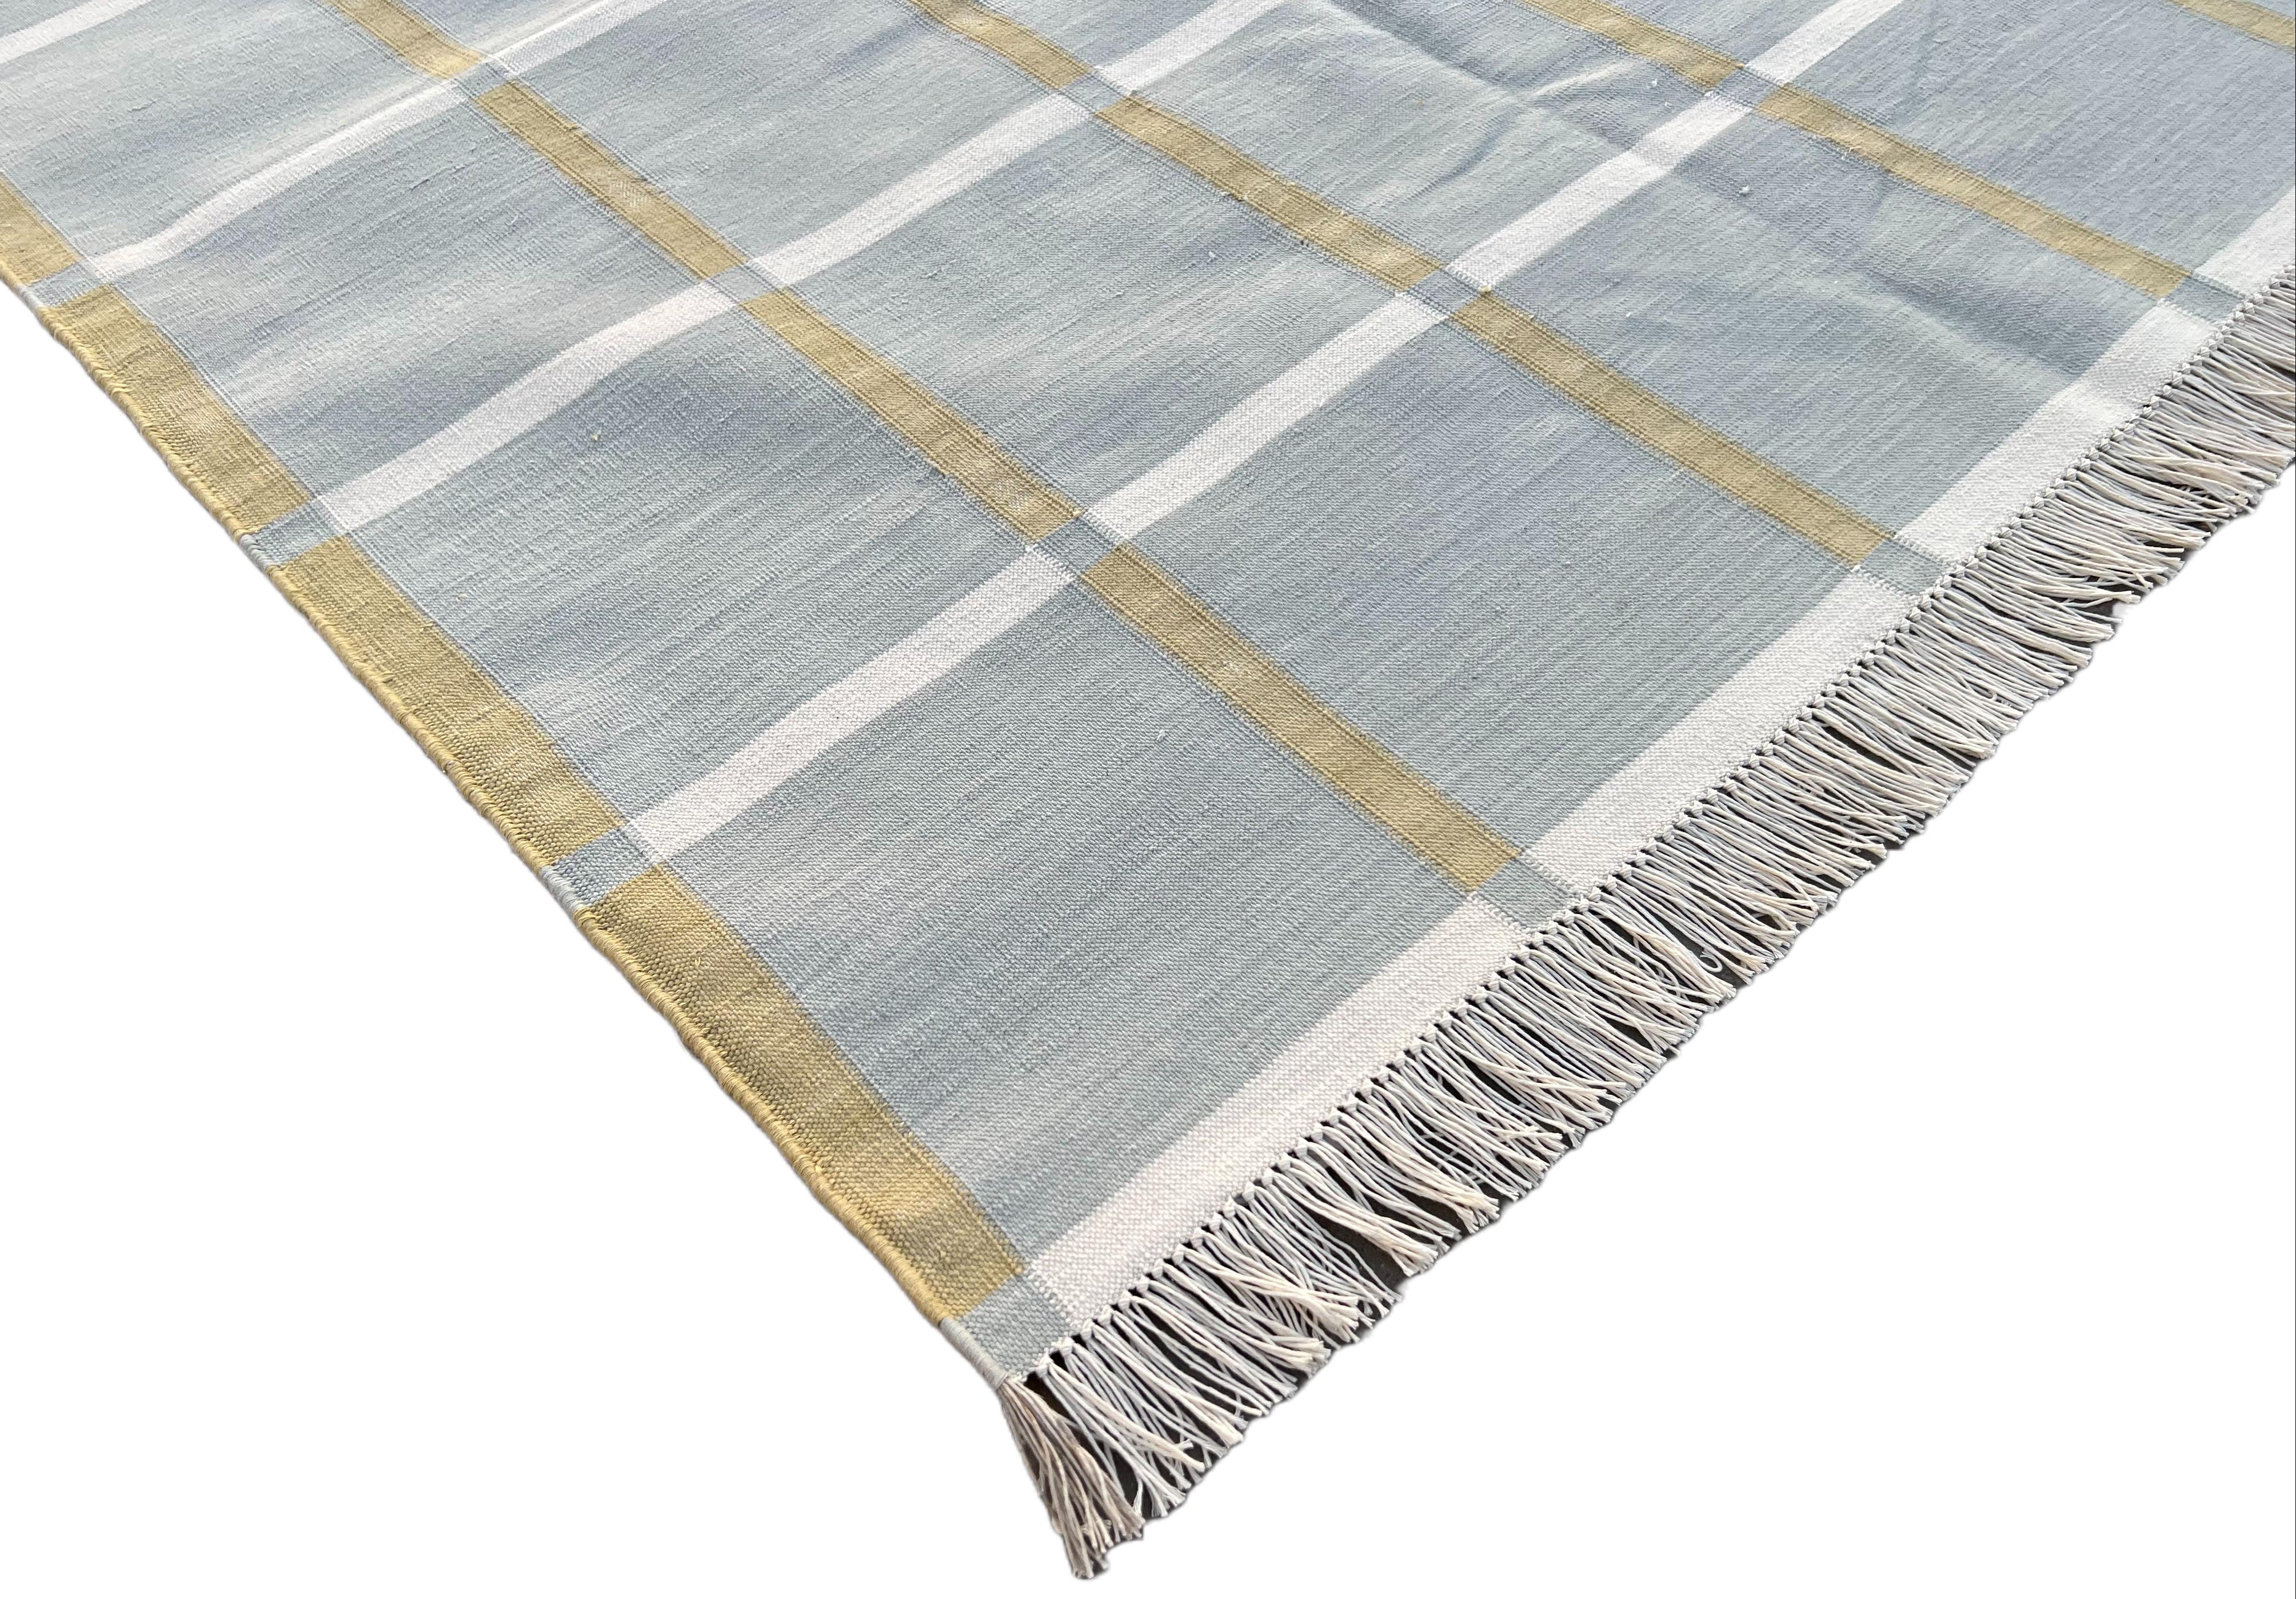 Hand-Woven Handmade Cotton Area Flat Weave Rug, 6x9 Grey Windowpane Checked Indian Dhurrie For Sale